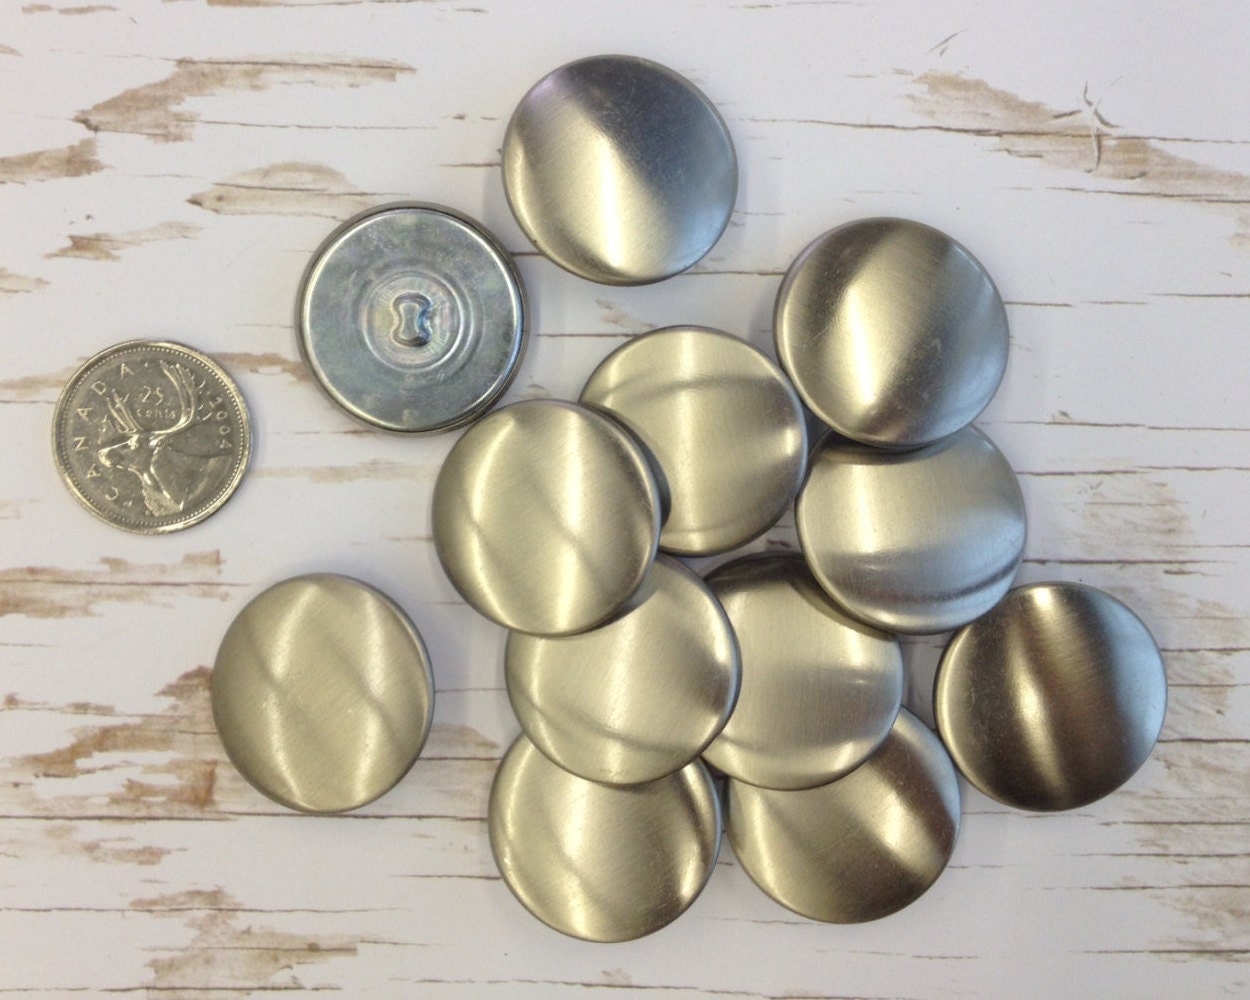 24mm Metal Shank Buttons, Pearl Buttons, Vintage Style Buttons, Silver and  Gold Shank Buttons, Clothing Buttons, Sewing Button #1M168